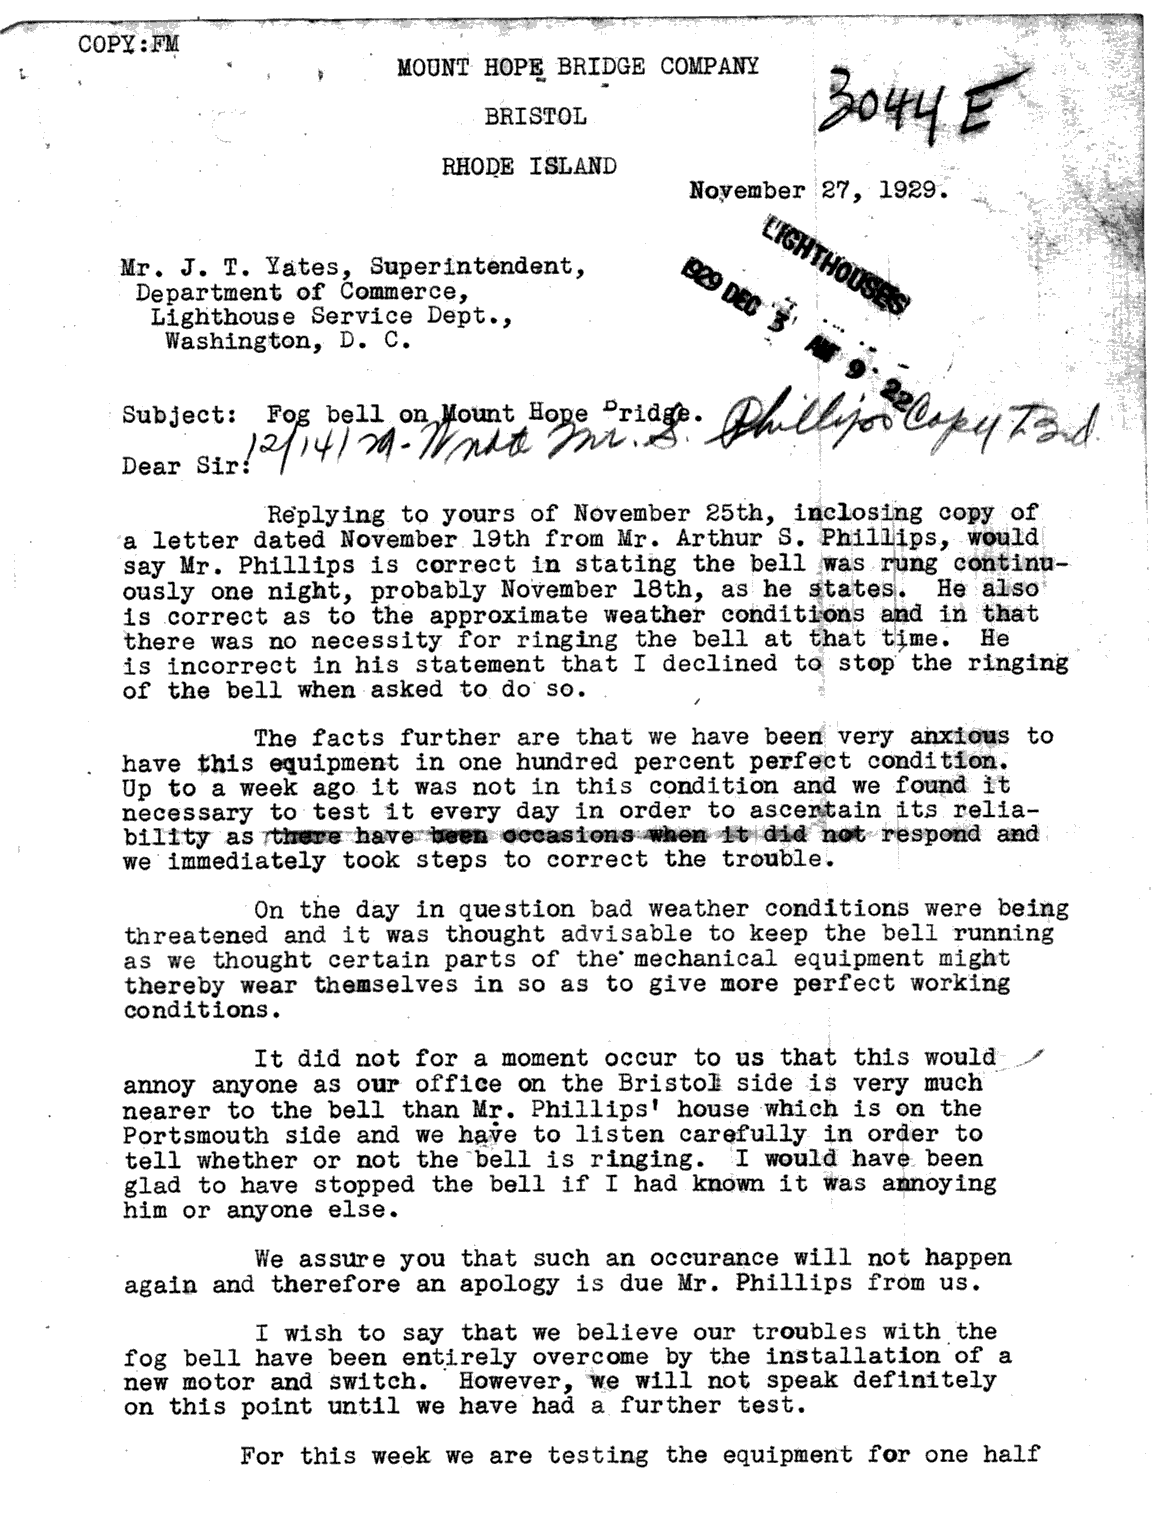 Mount Hope Bridge Company Letter to Lighthouse Service about Fog Bell